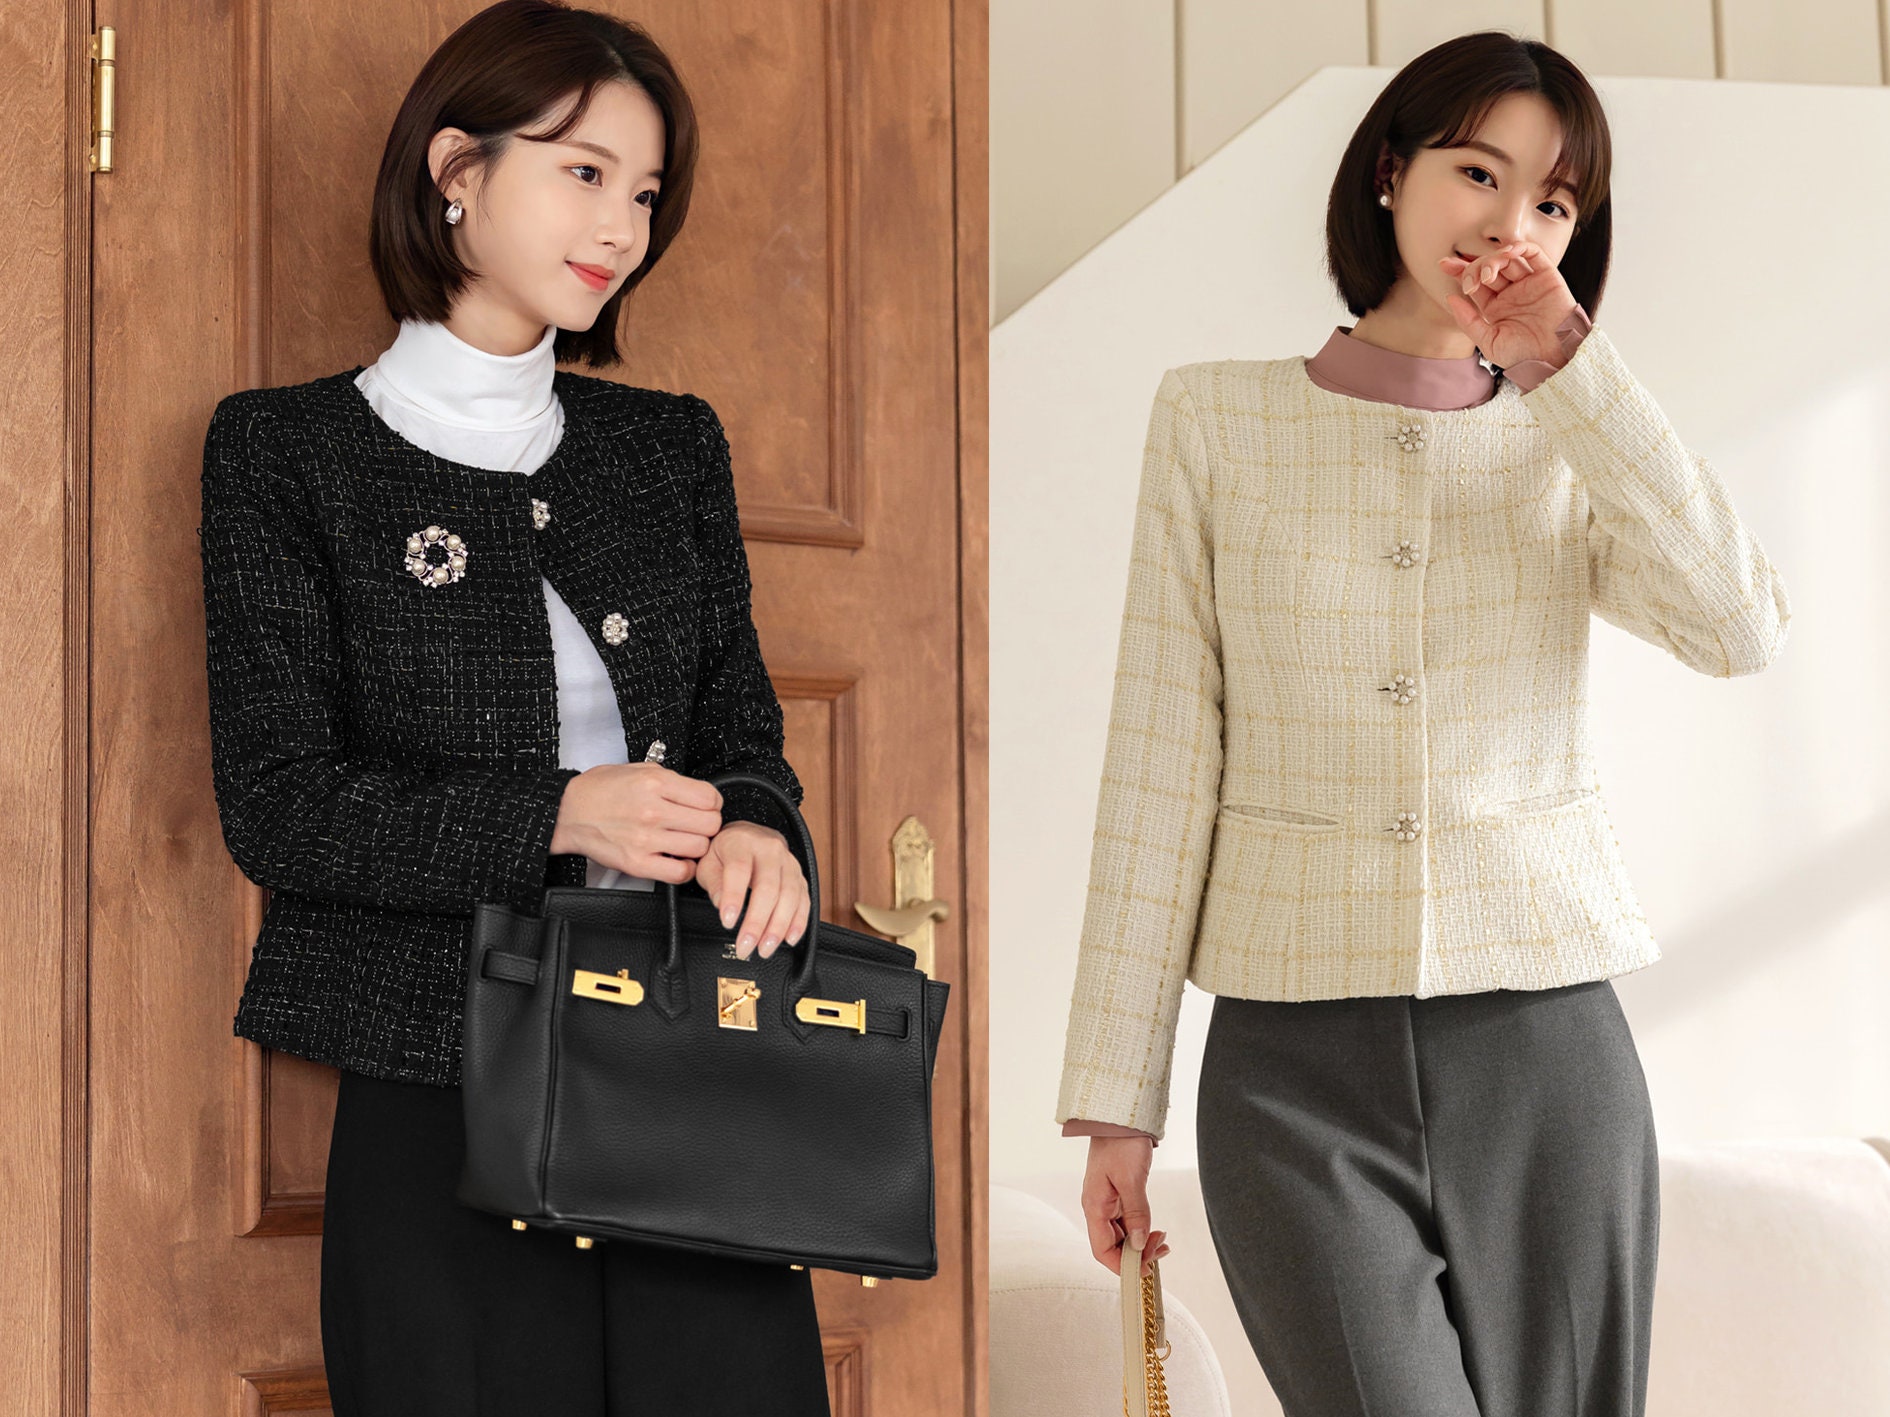 chanel suit jackets for women tweed